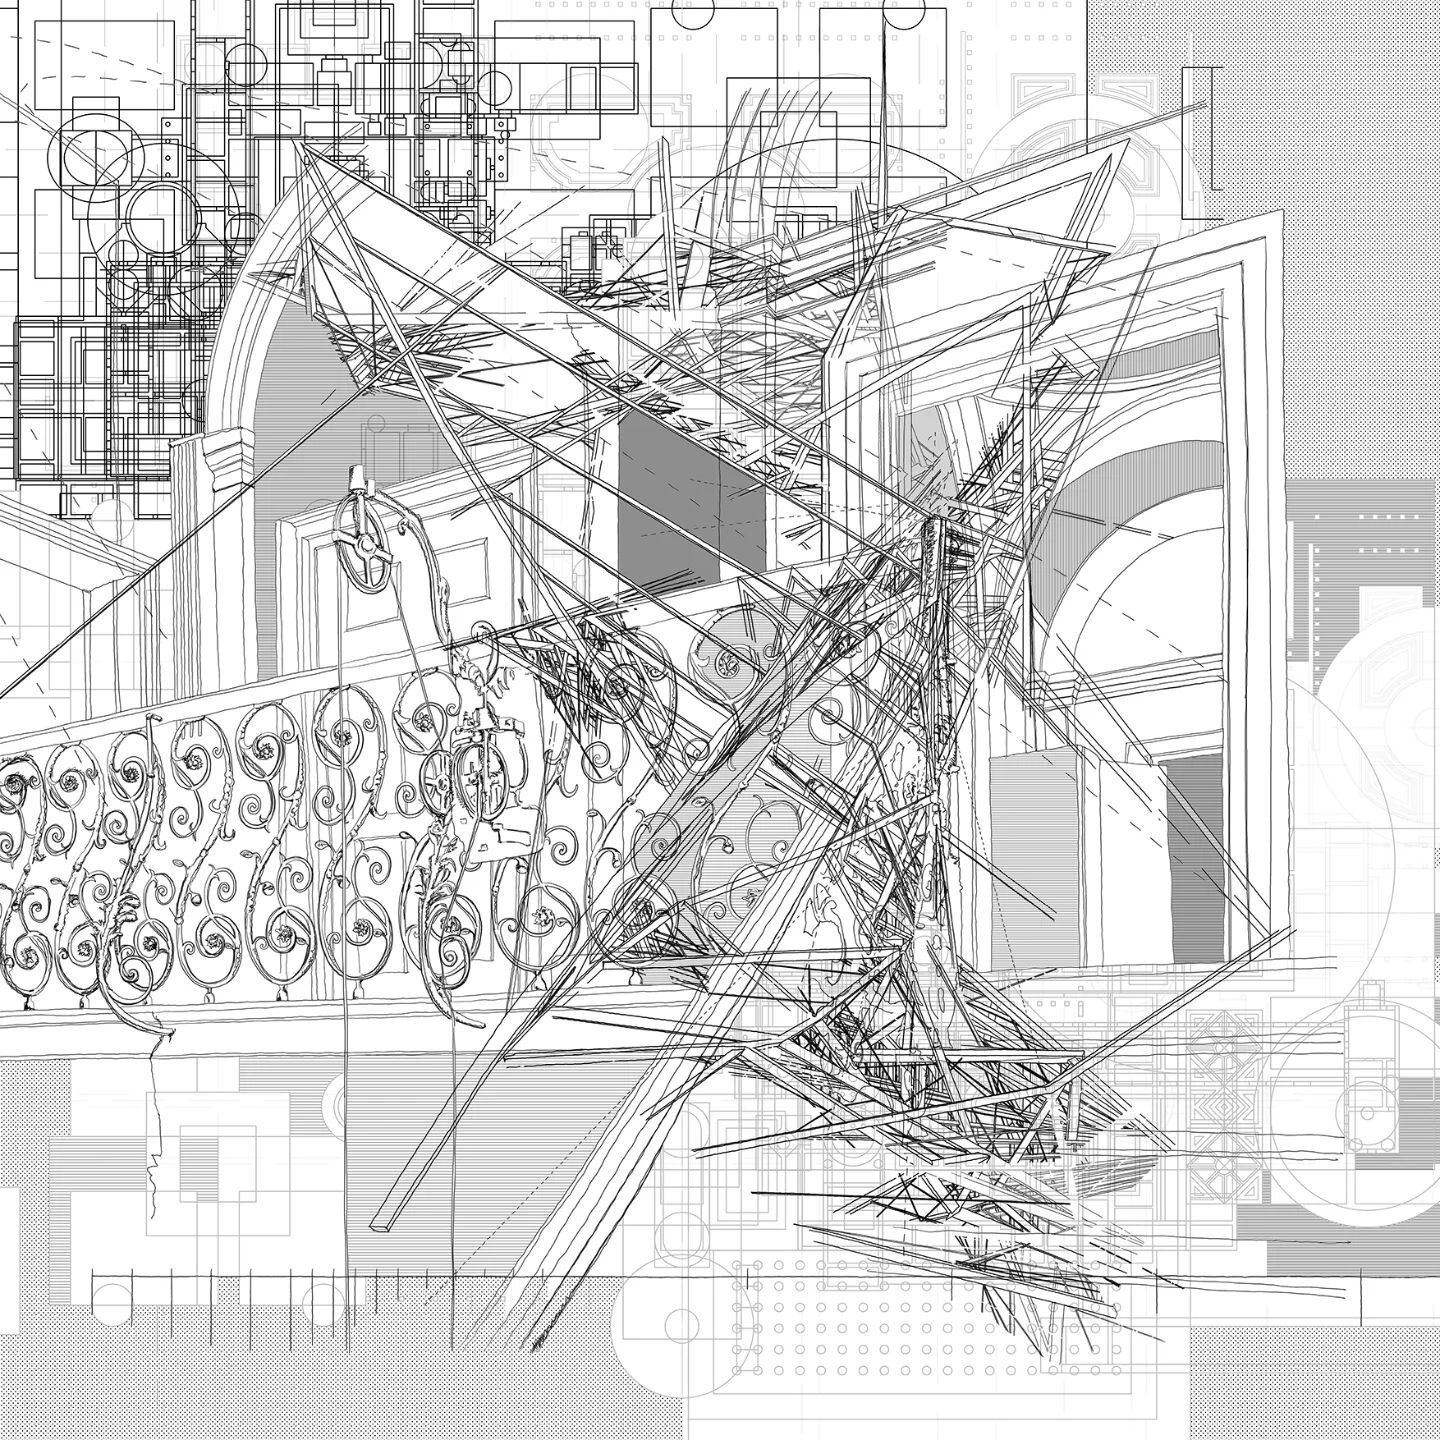 Pembroke House #wip #architecture #architecturaldrawing #speculativedesign #reconstruction #projection #fabrication #fiction